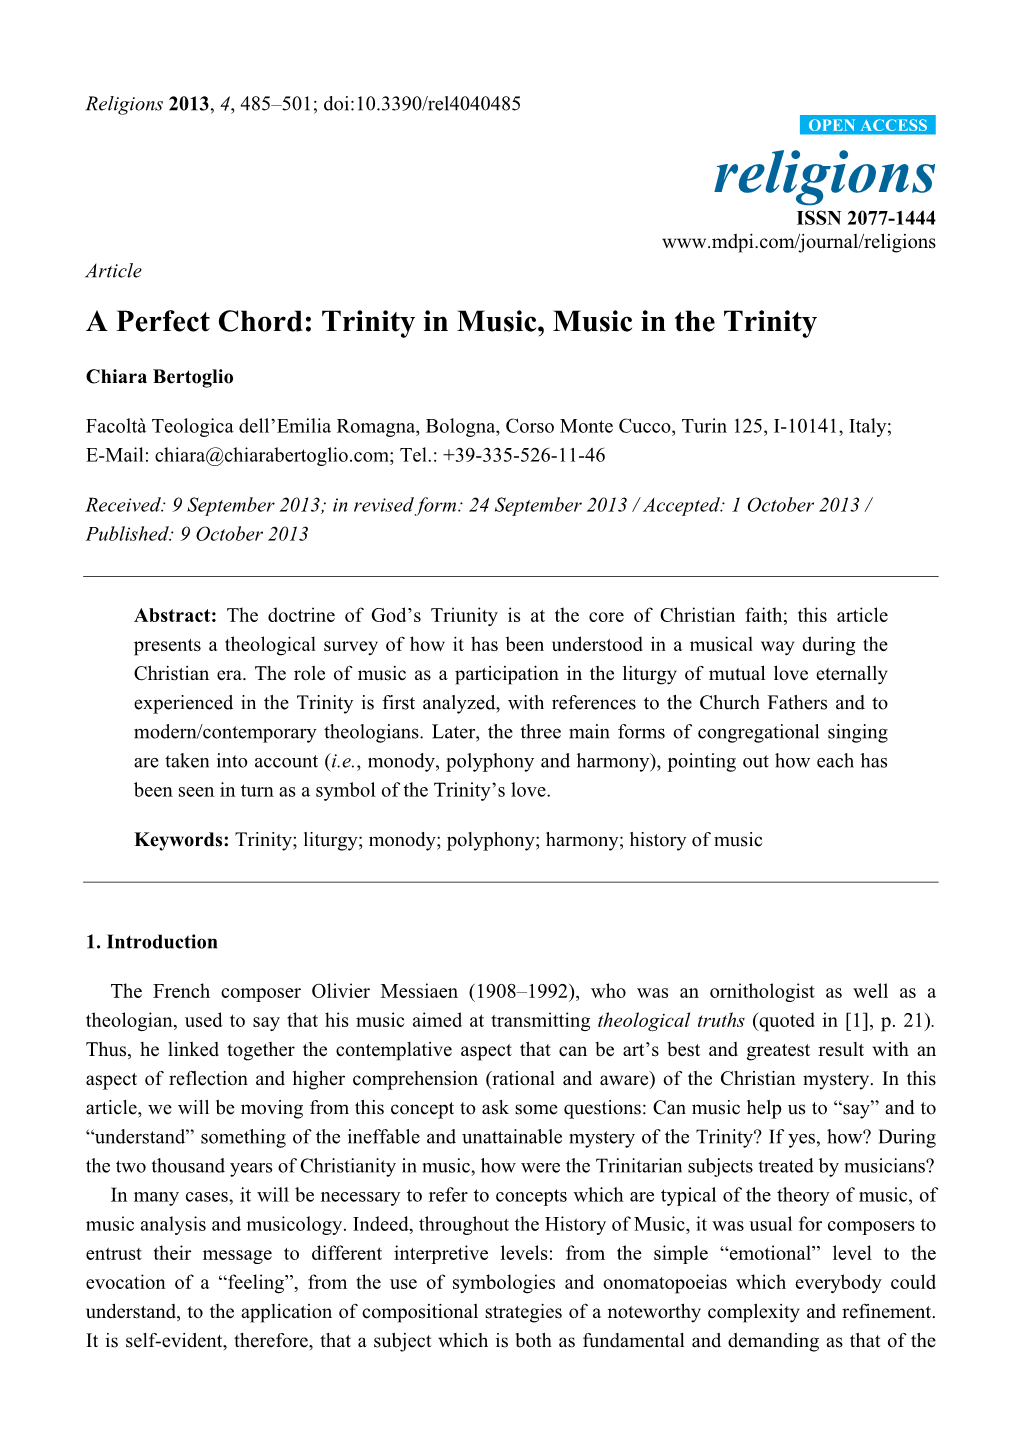 A Perfect Chord: Trinity in Music, Music in the Trinity